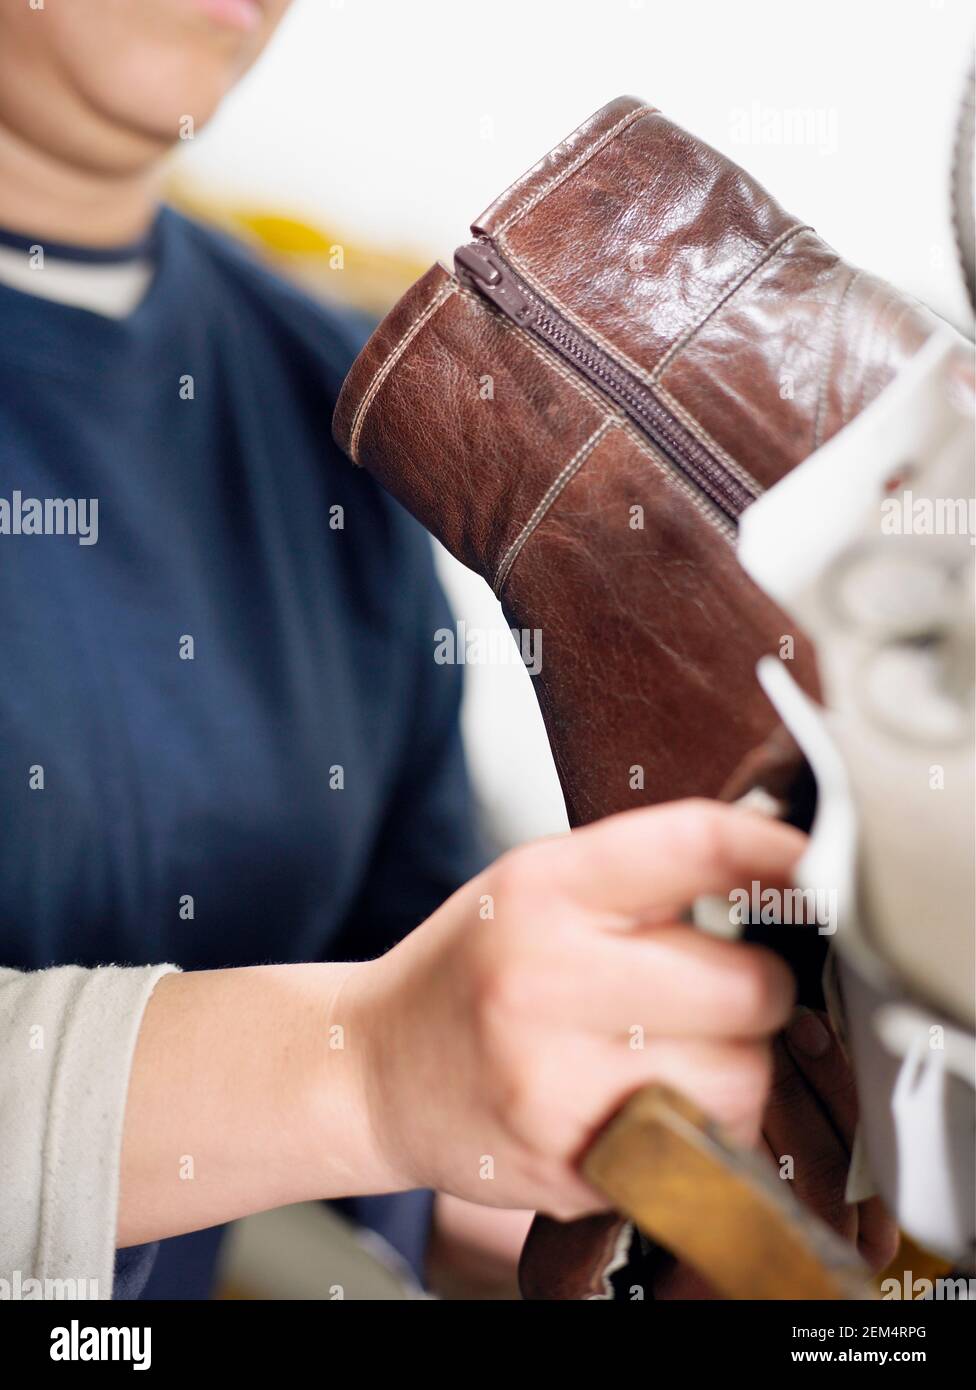 Mid section view of a mid adult woman working in a shoe factory Stock Photo